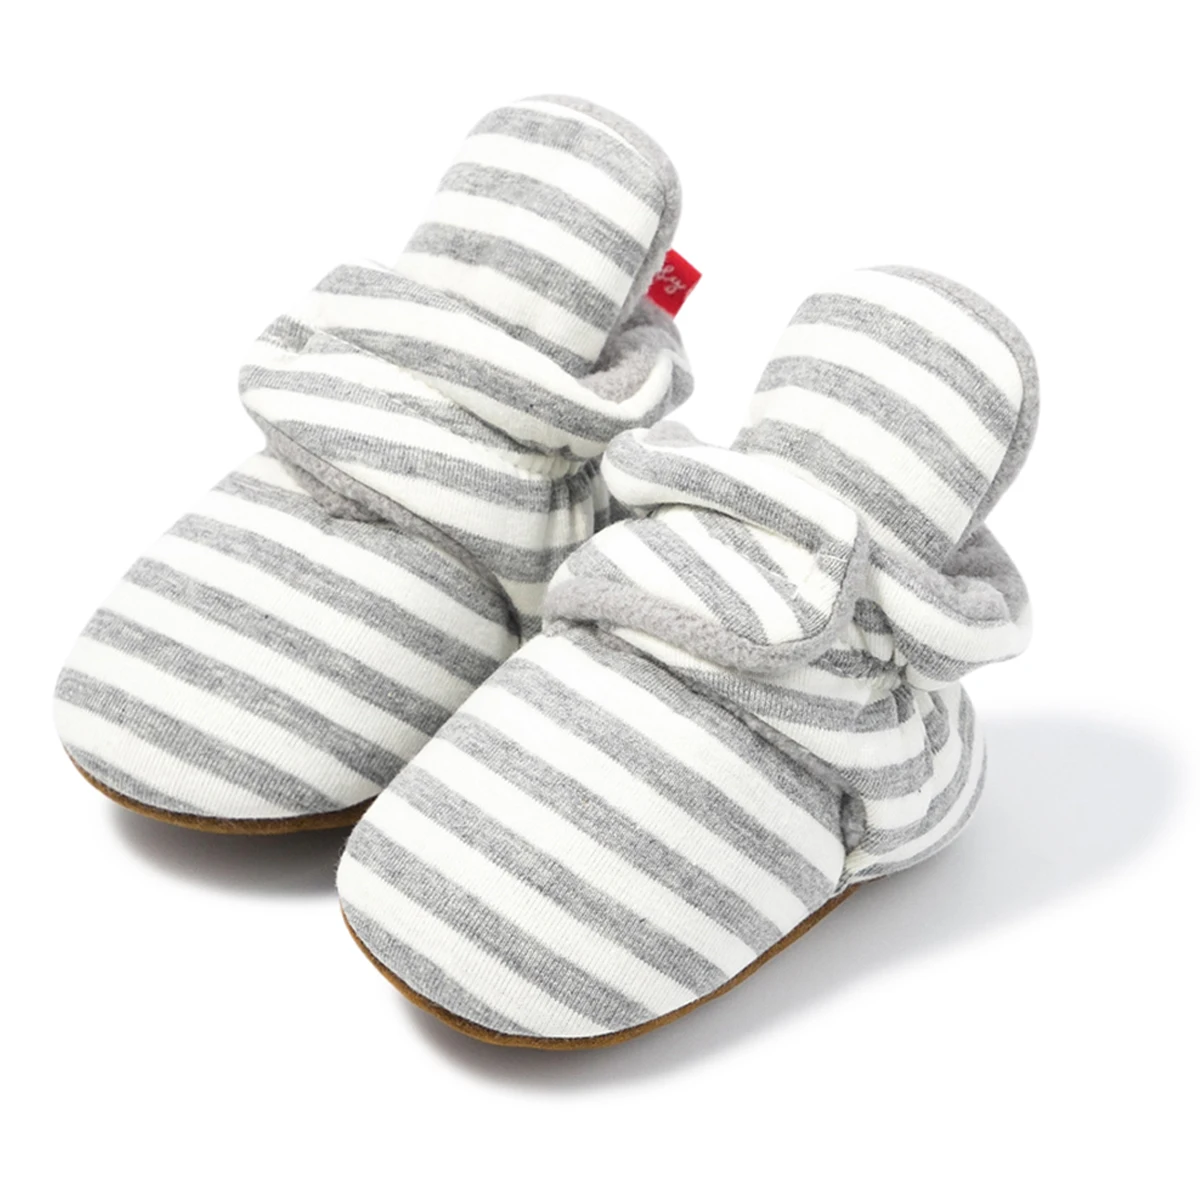 Whole Cotton Fabric Striped Print Infant Indoor Boy Girl Sock Shoes Booties Crib Baby Socks